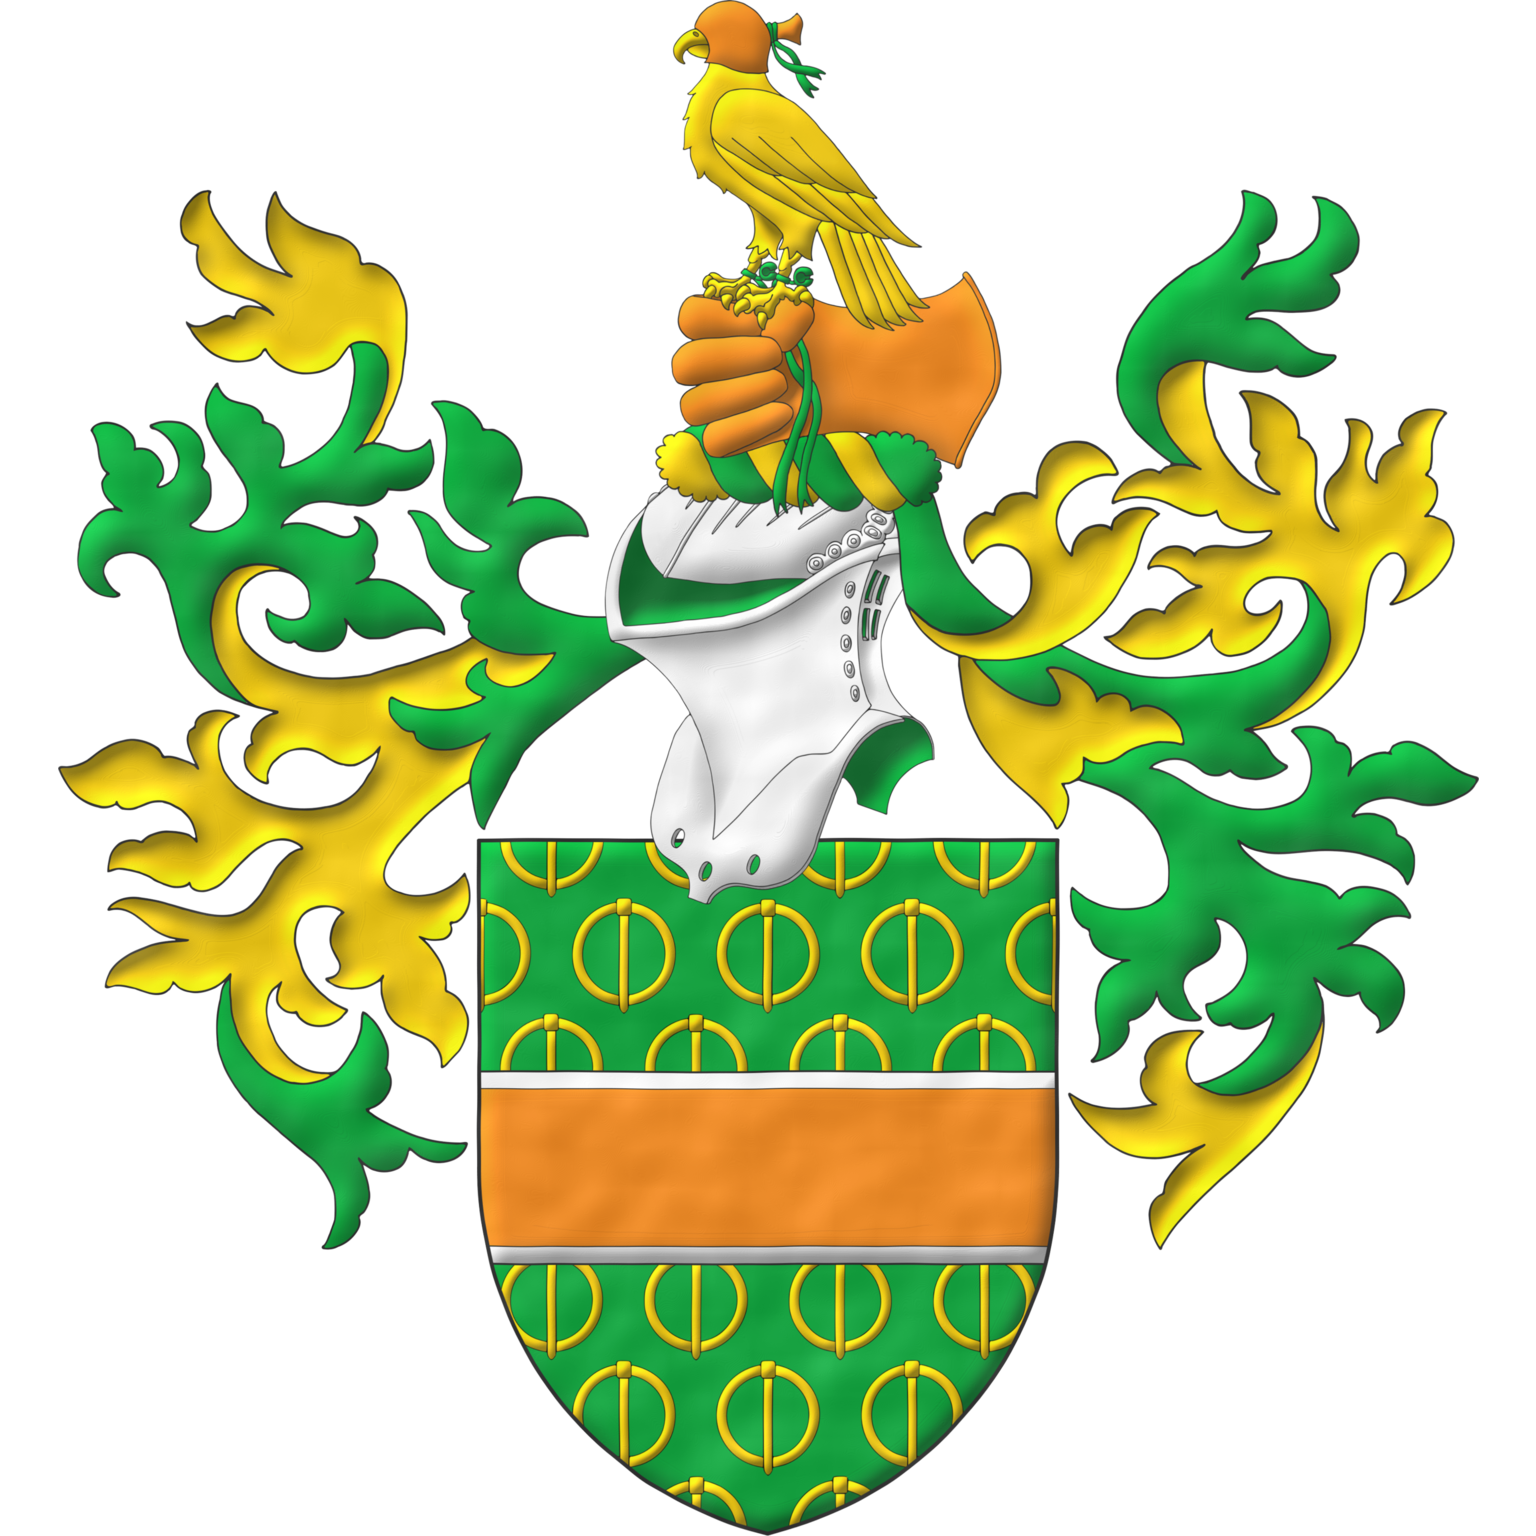 Vert semé of buckles points downward Or, a fess Tenné, fimbriated Argent. Crest: Upon a helm with a wreath Or and Vert, a glove Tenné holding a falcon Or, hooded Tenné, jessed and belled Vert. Mantling: Vert doubled Or.